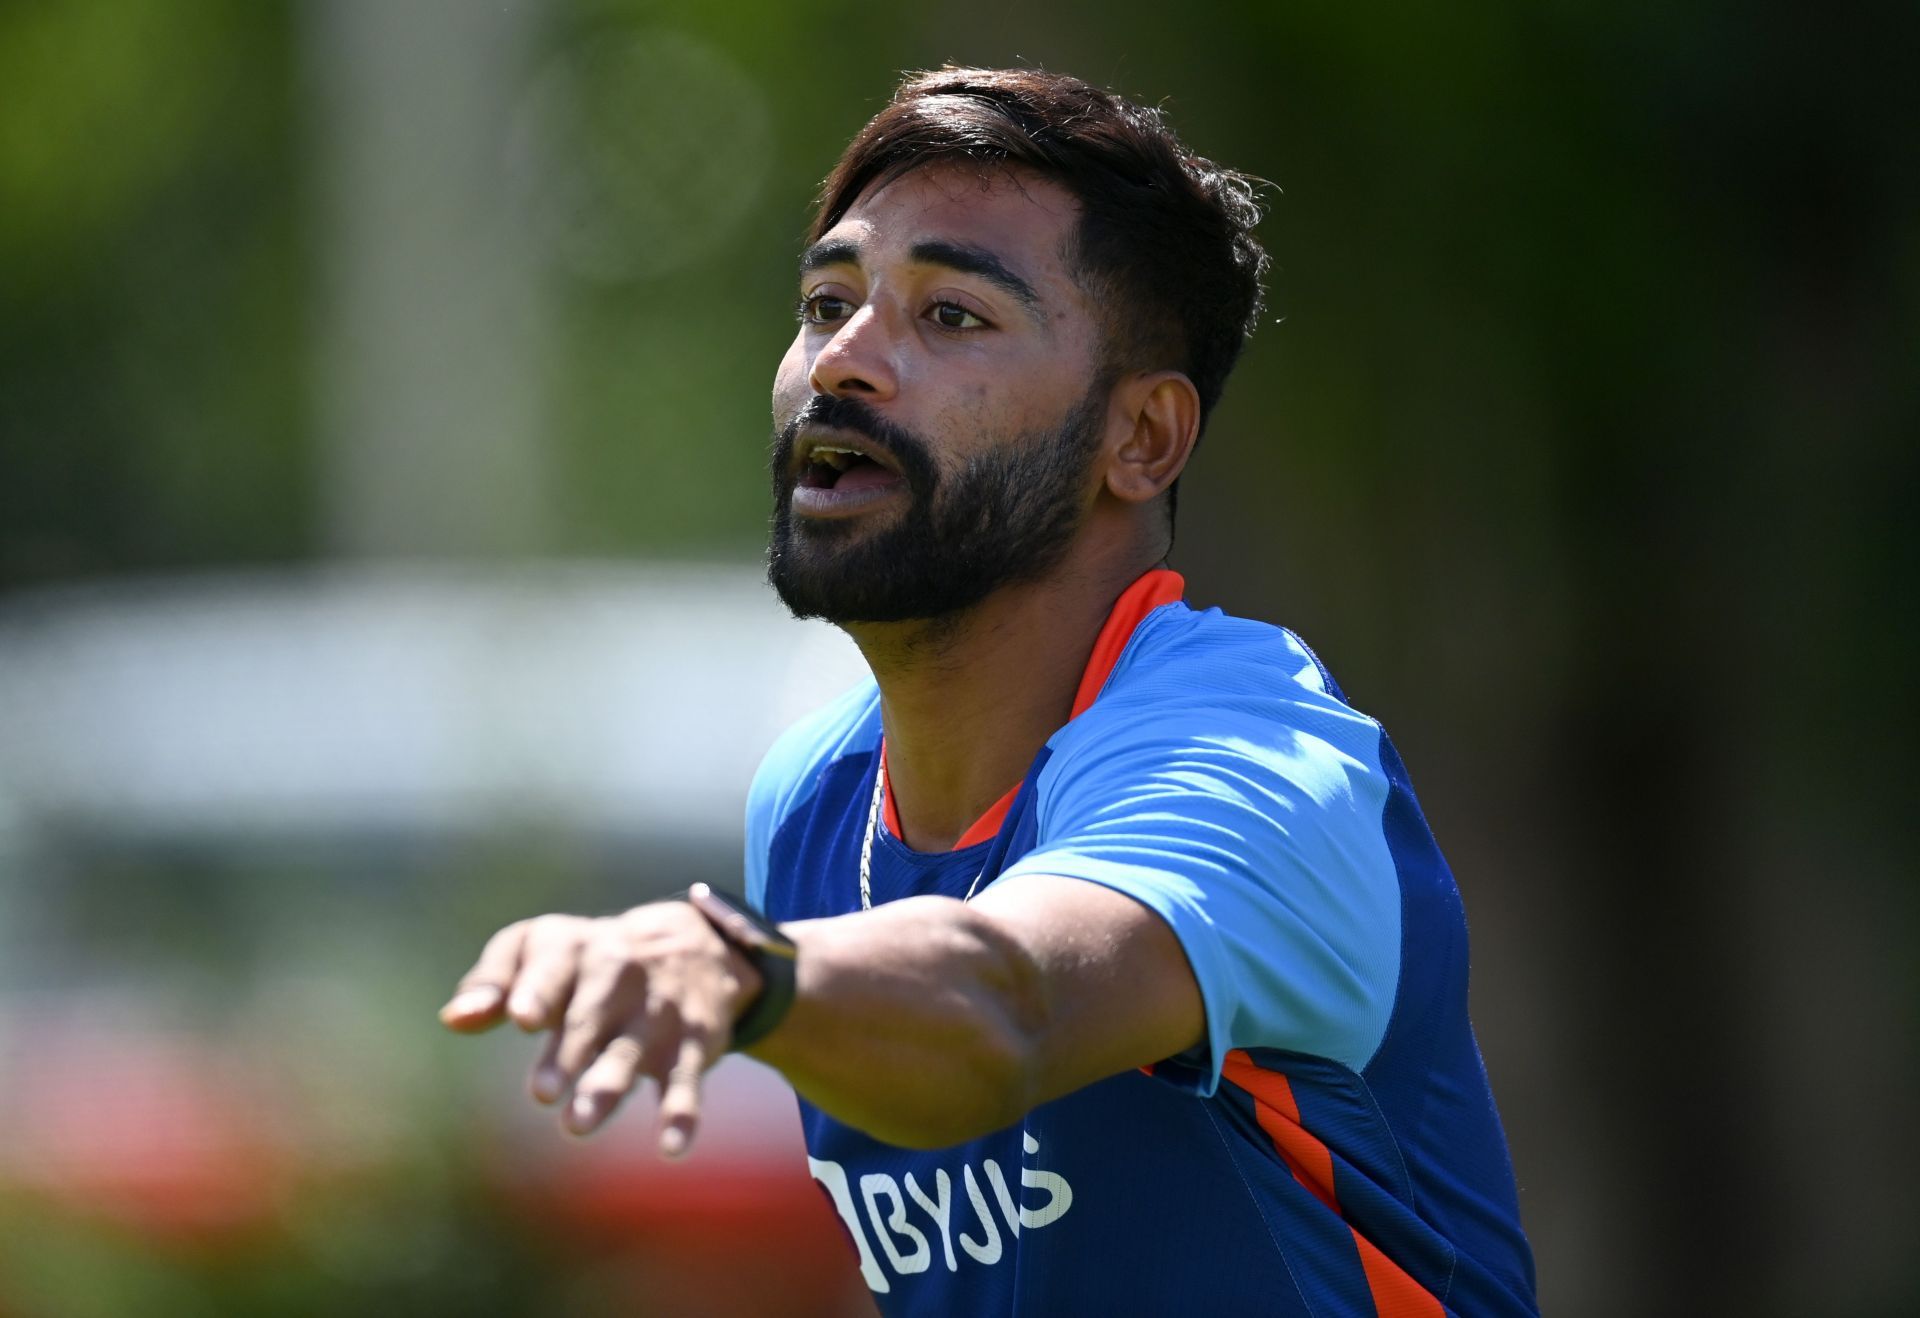 Mohammed Siraj is the number one ranked bowler as per the ICC ODI rankings